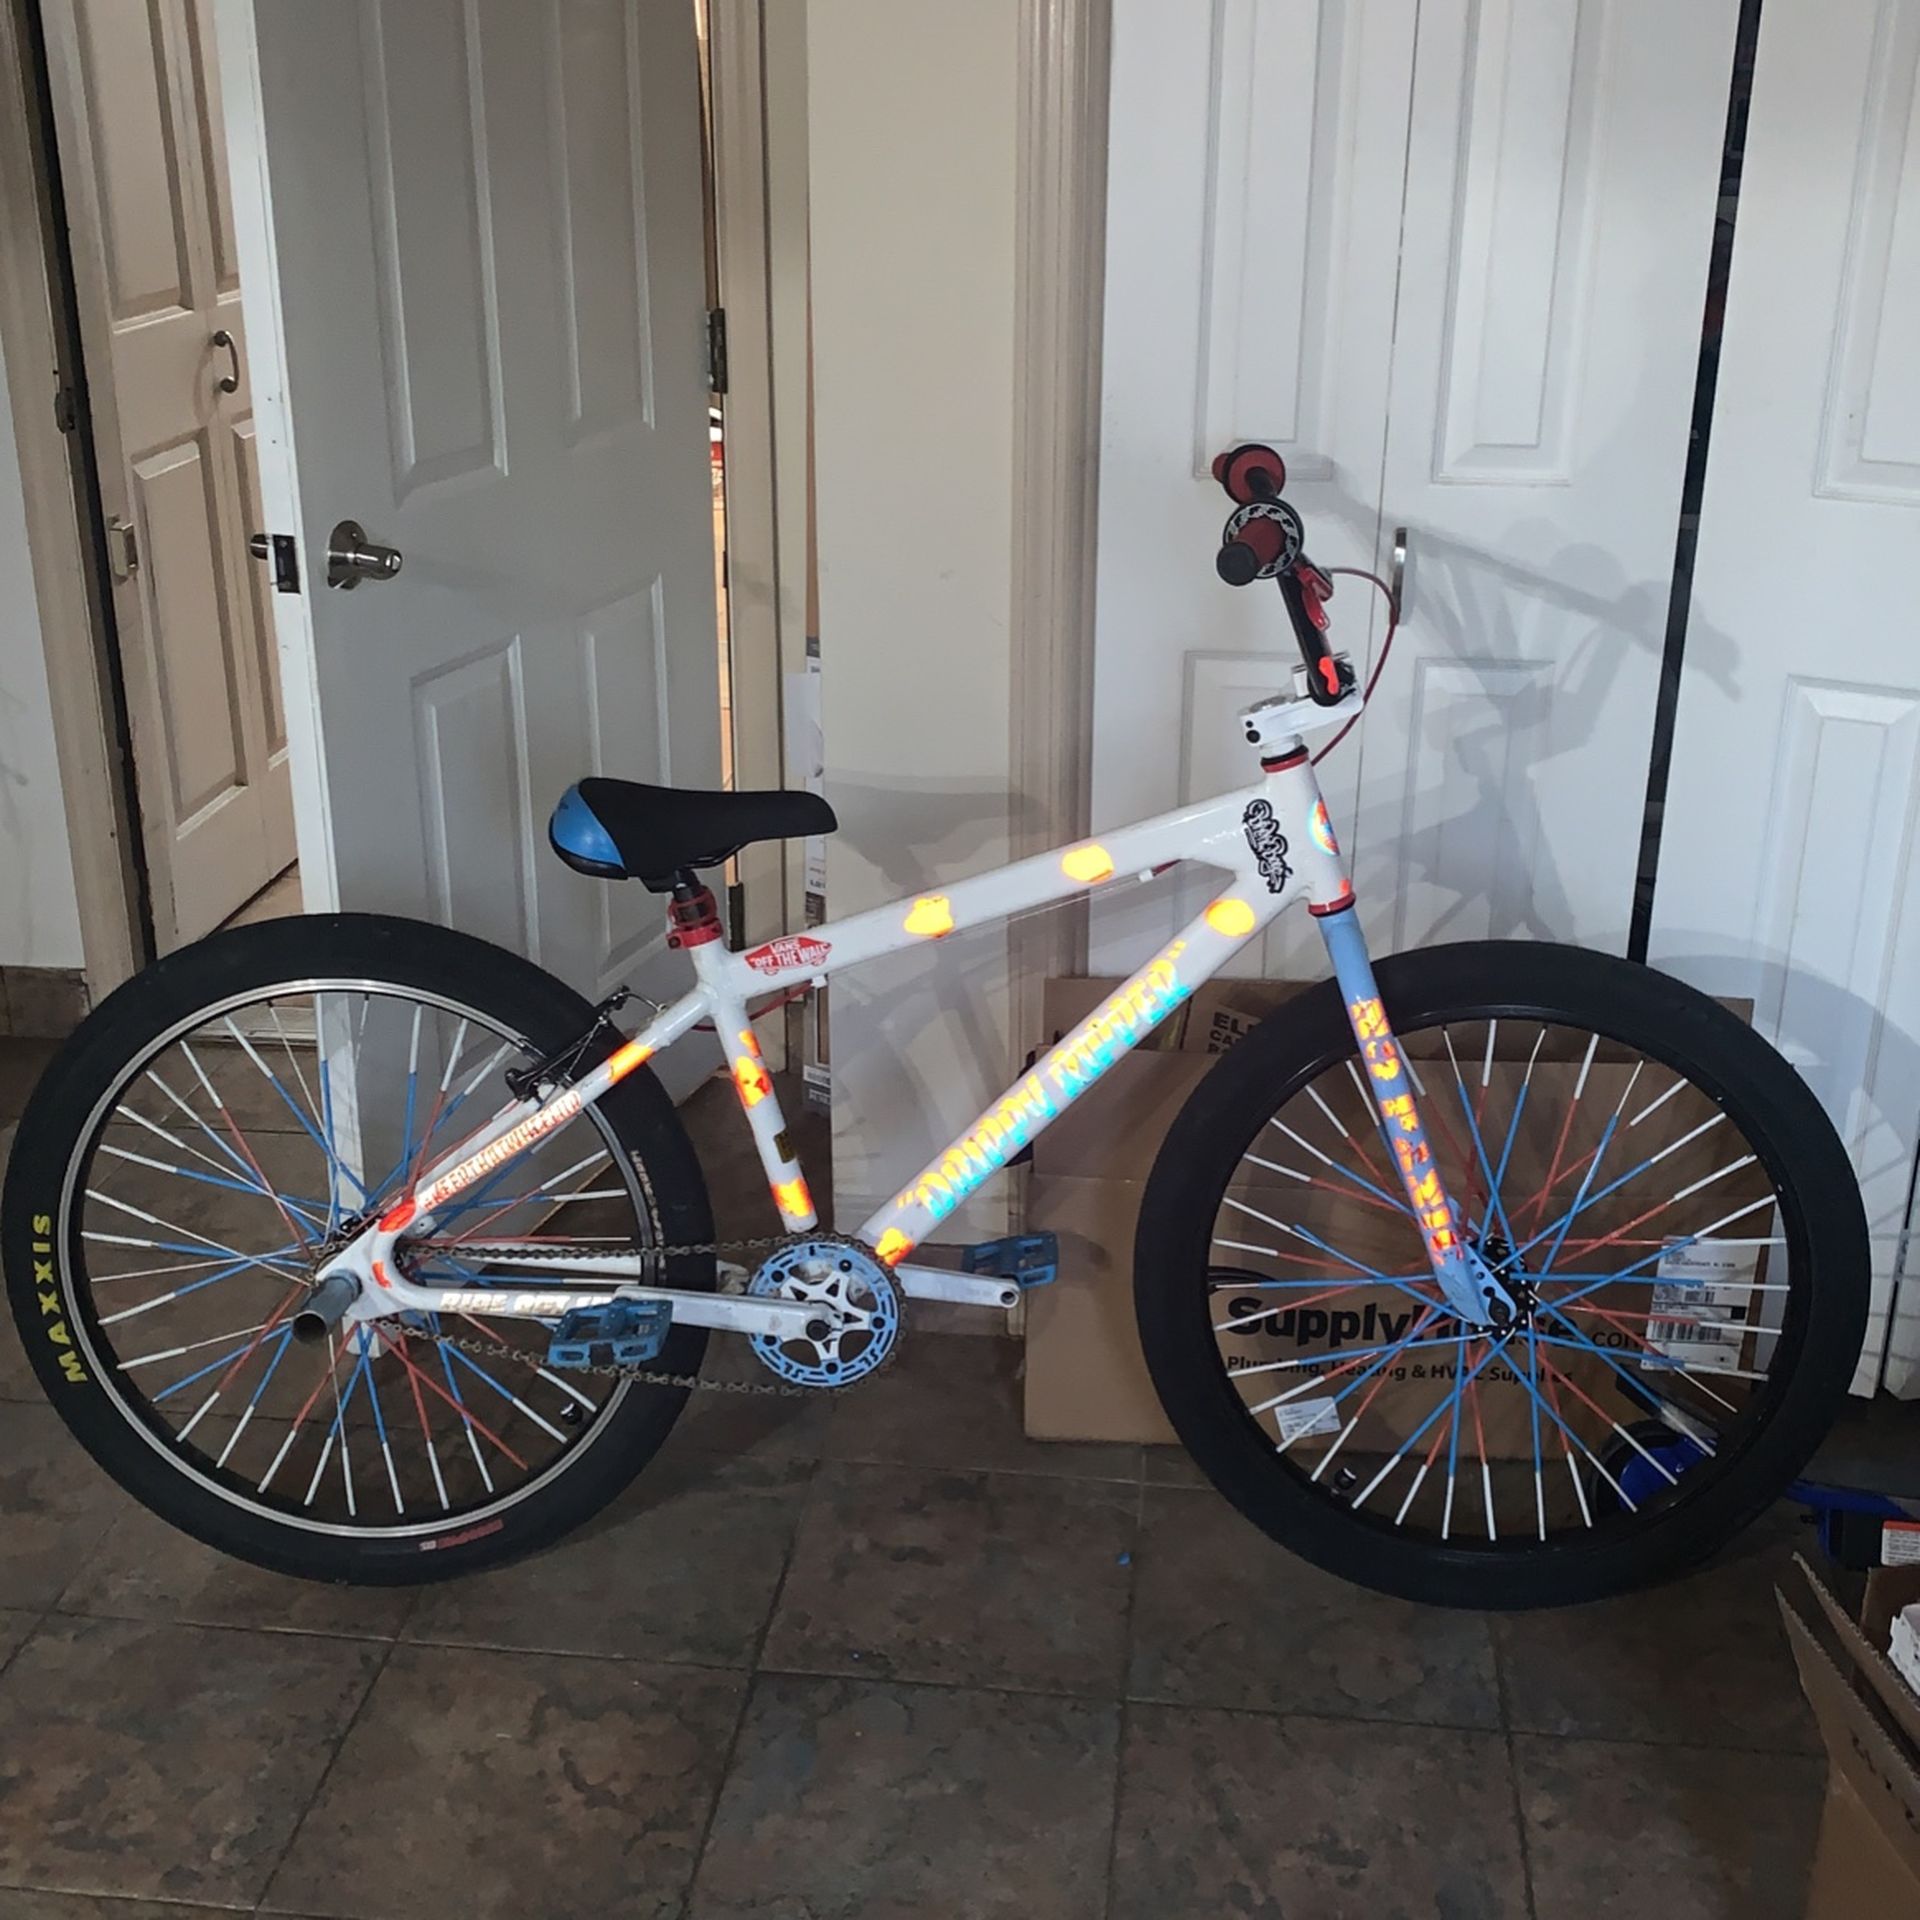 2019 SE BIKE MIKE BUFF PK RIPPER LIMITED EDITION NUMBER 19/250